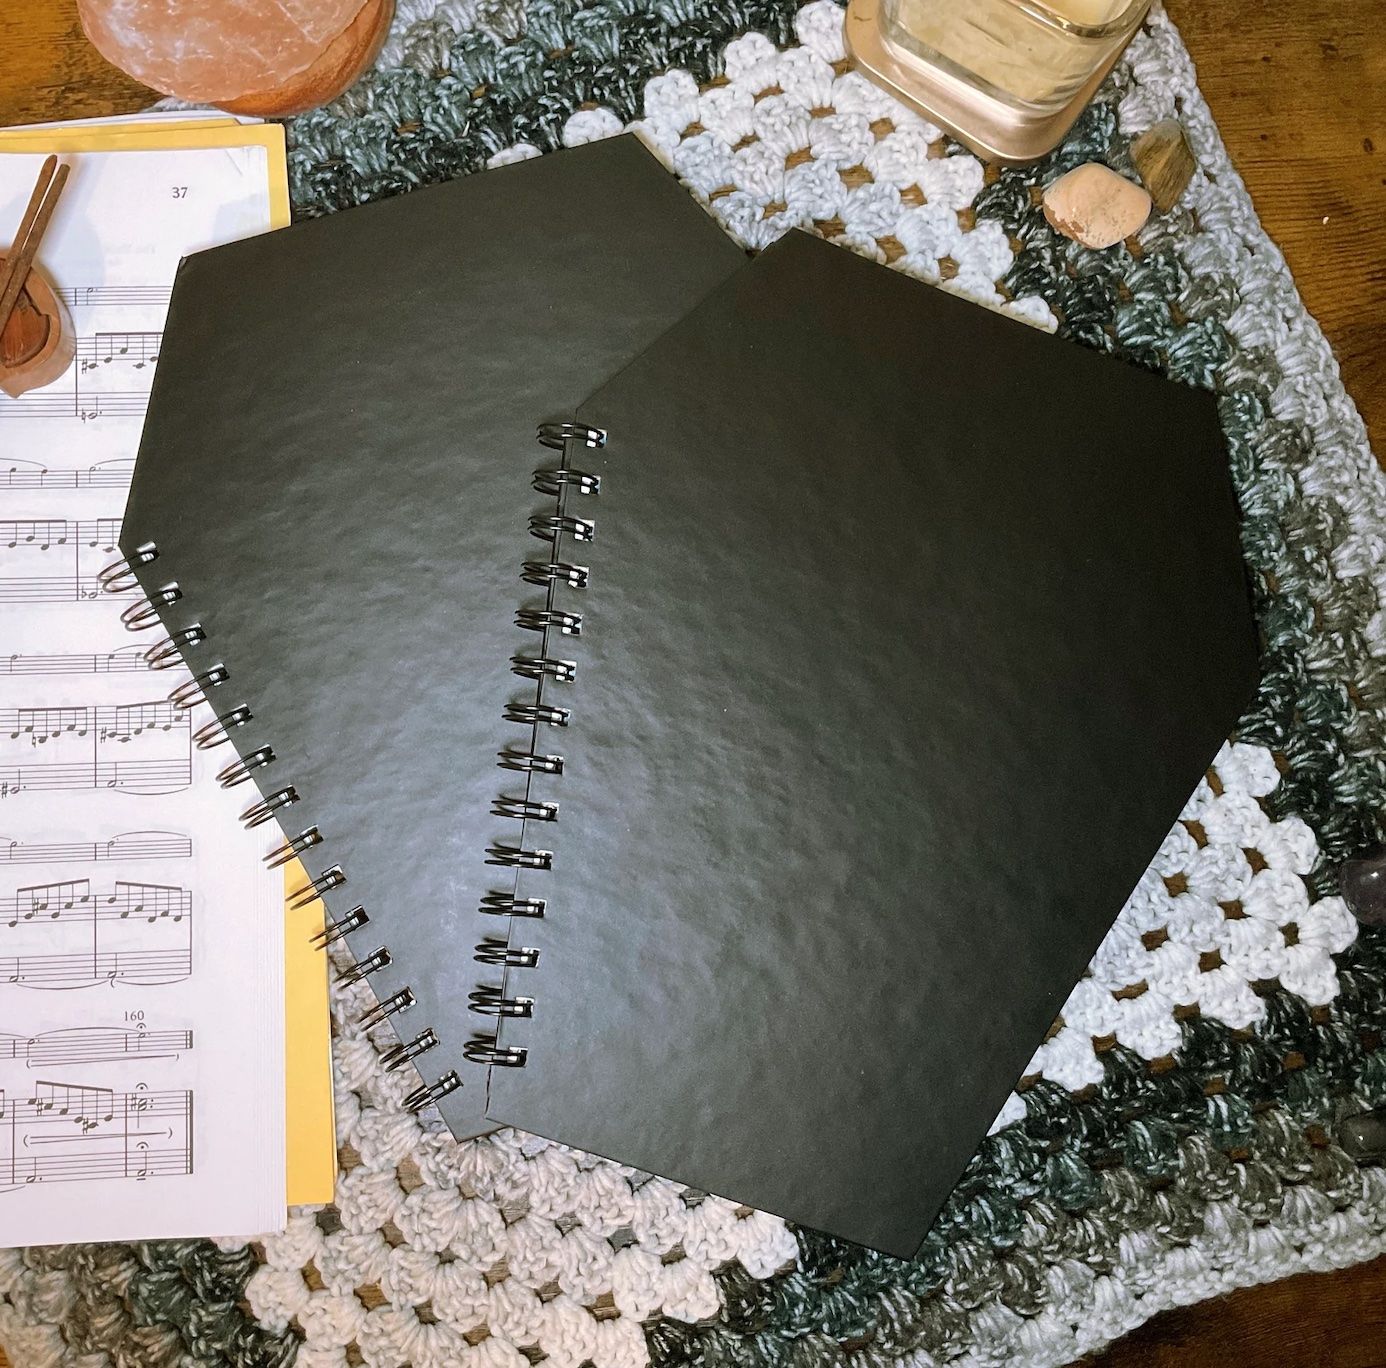 Black spiral notebook shaped like a coffin